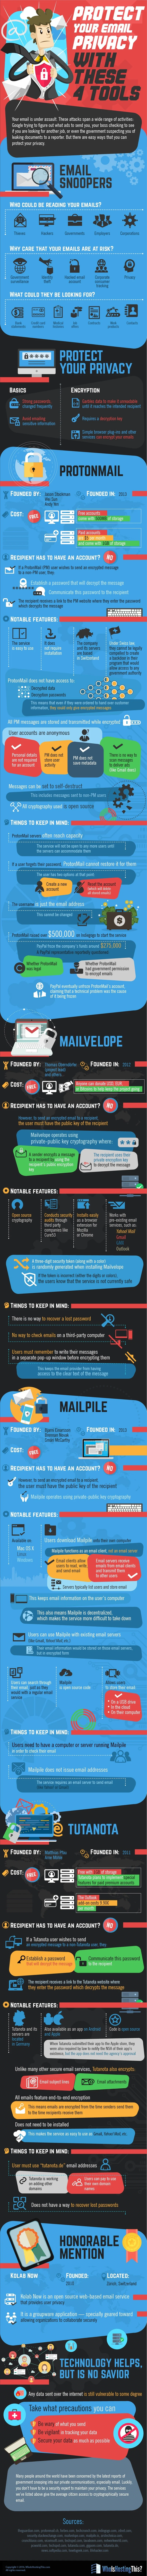 4 Email Privacy Tools to Keep Your Email Secure [infographic]